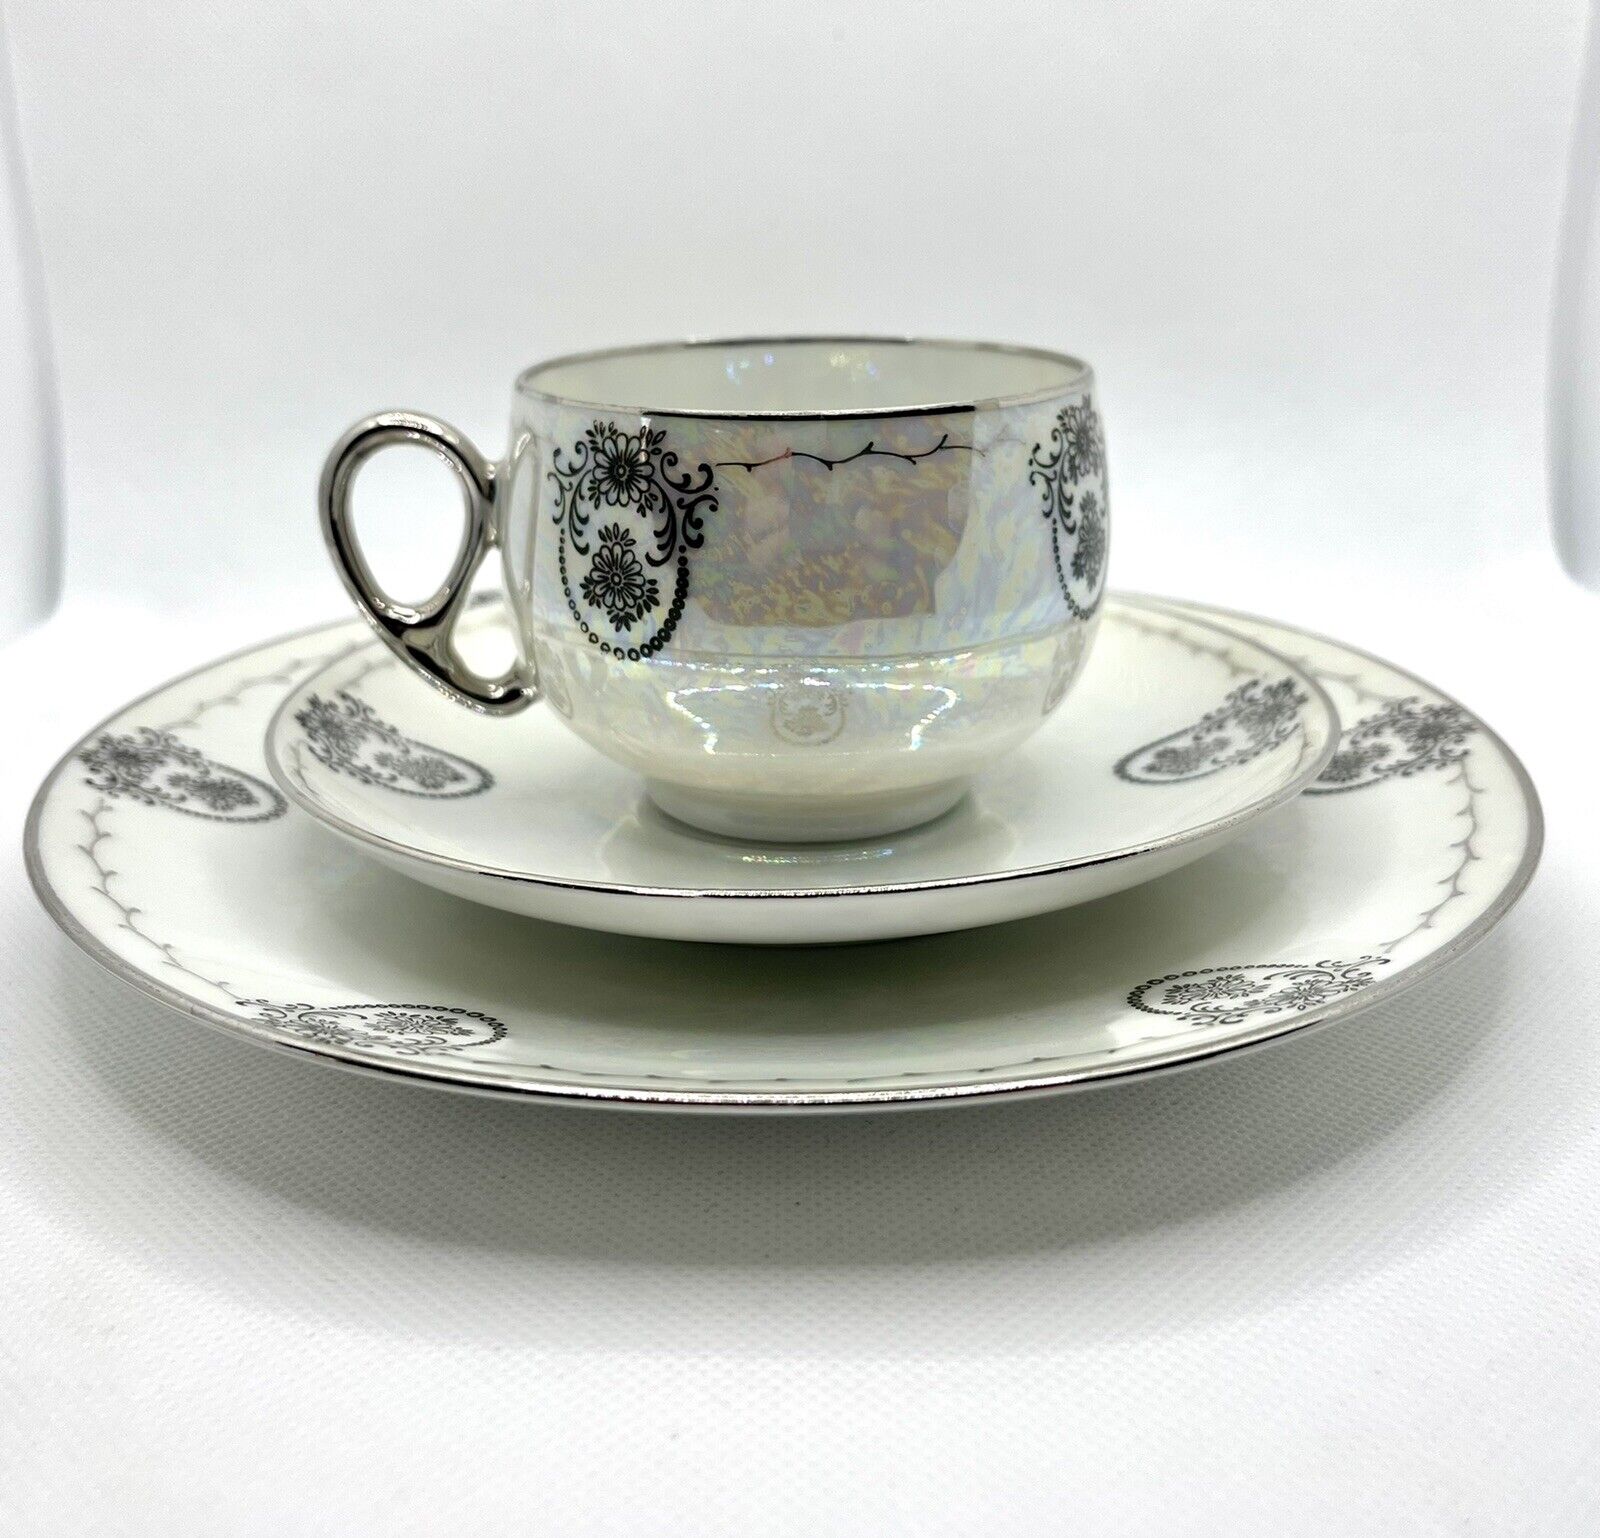 Antique Hermann Ohme Germany tea cup saucer 7.5”plate fine china set Iridescent